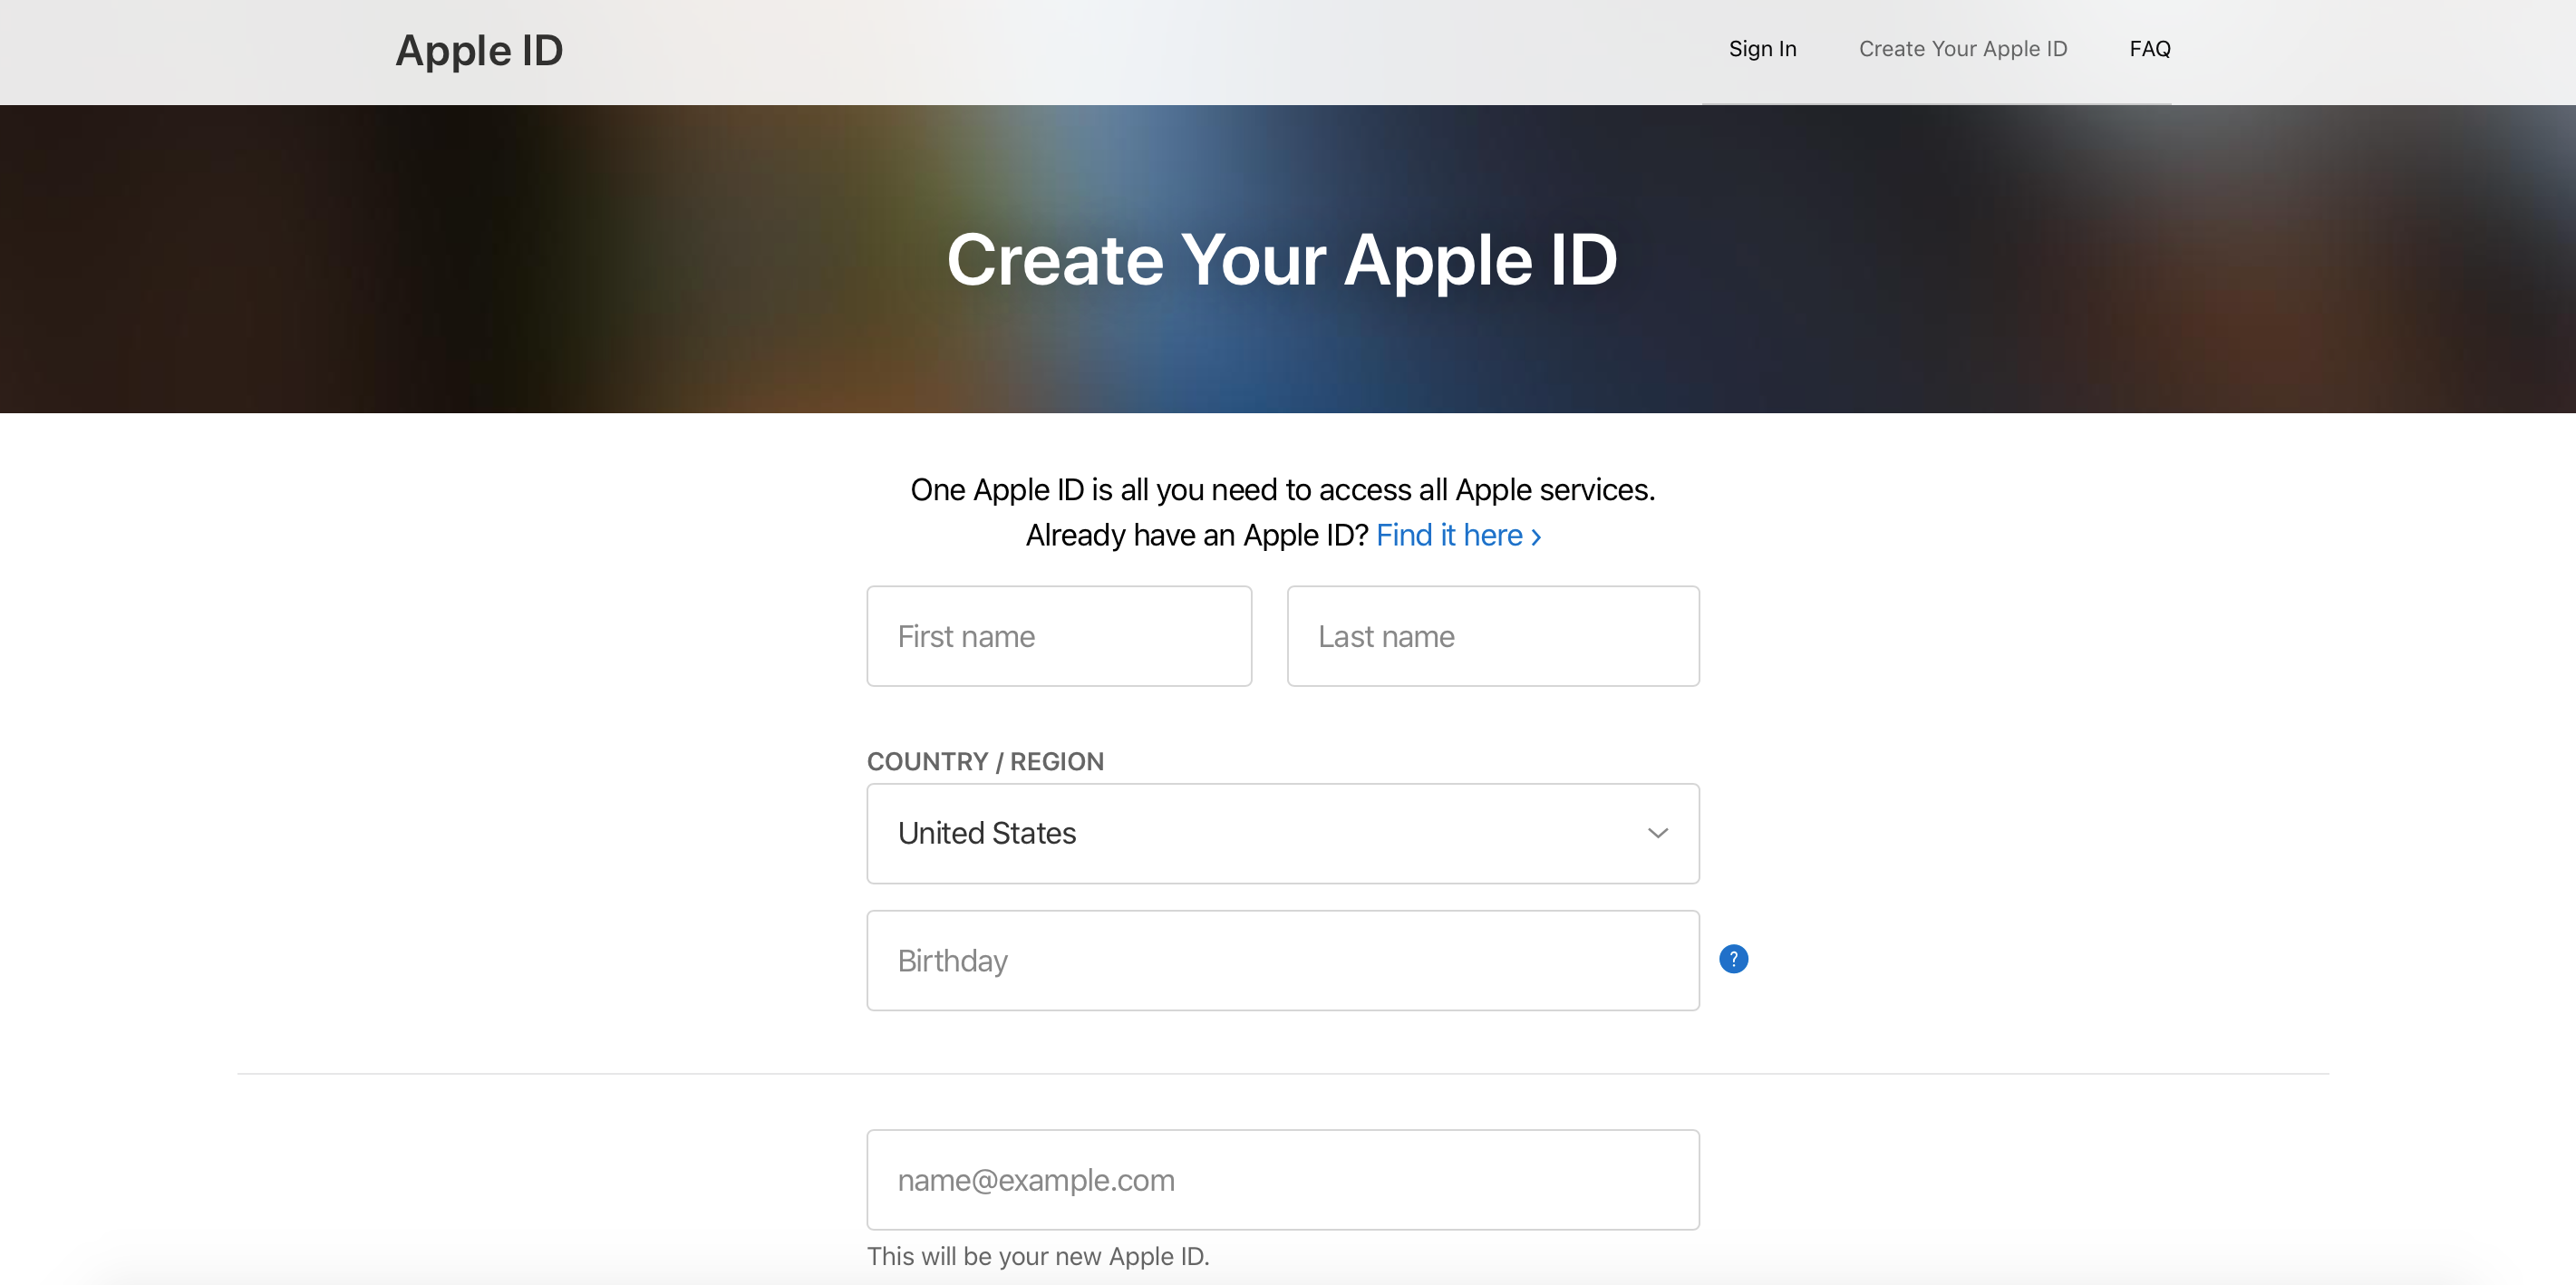 creating an Apple ID on the web from any device